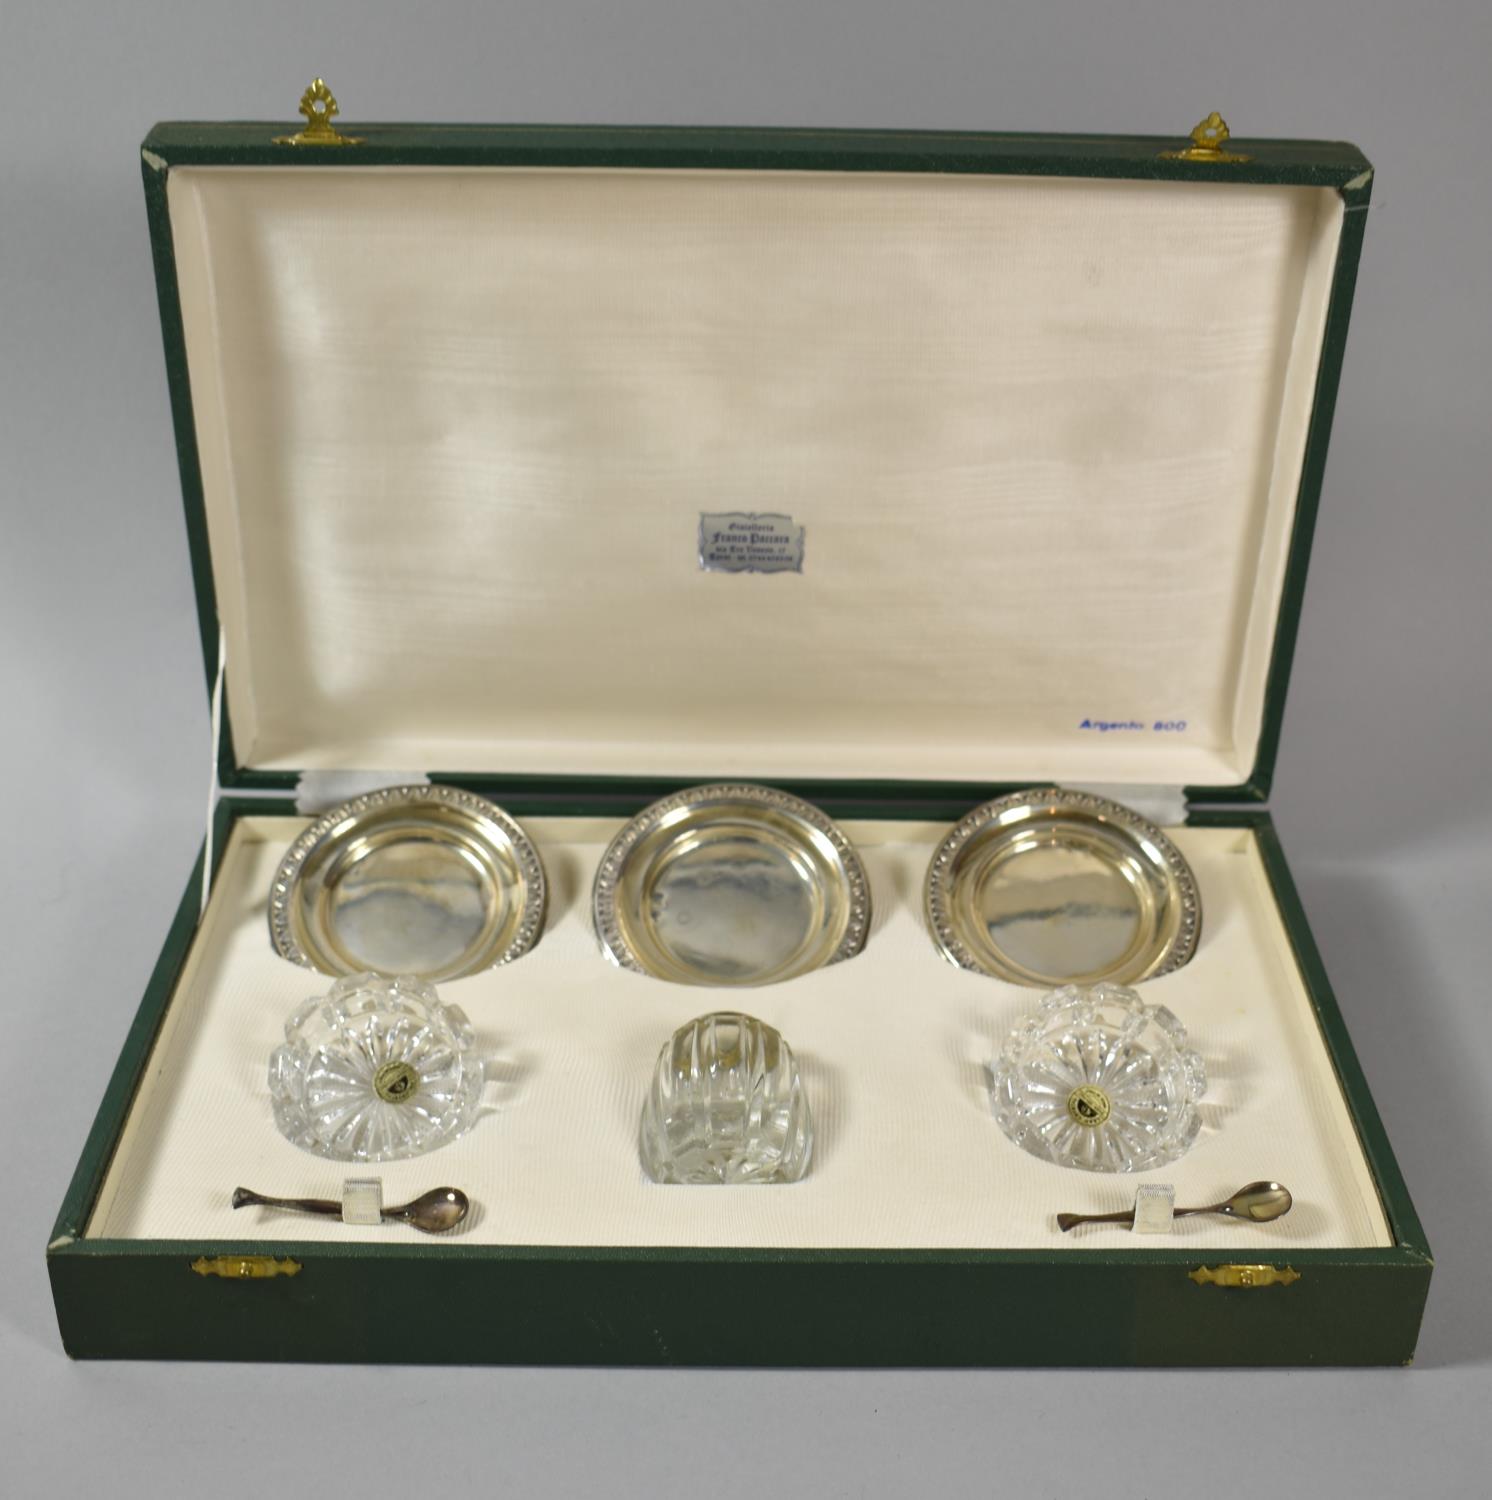 A Mid 20th Century Cased Italian Three Piece Cruet Set with Lead Crystal Containers and 800 Silver